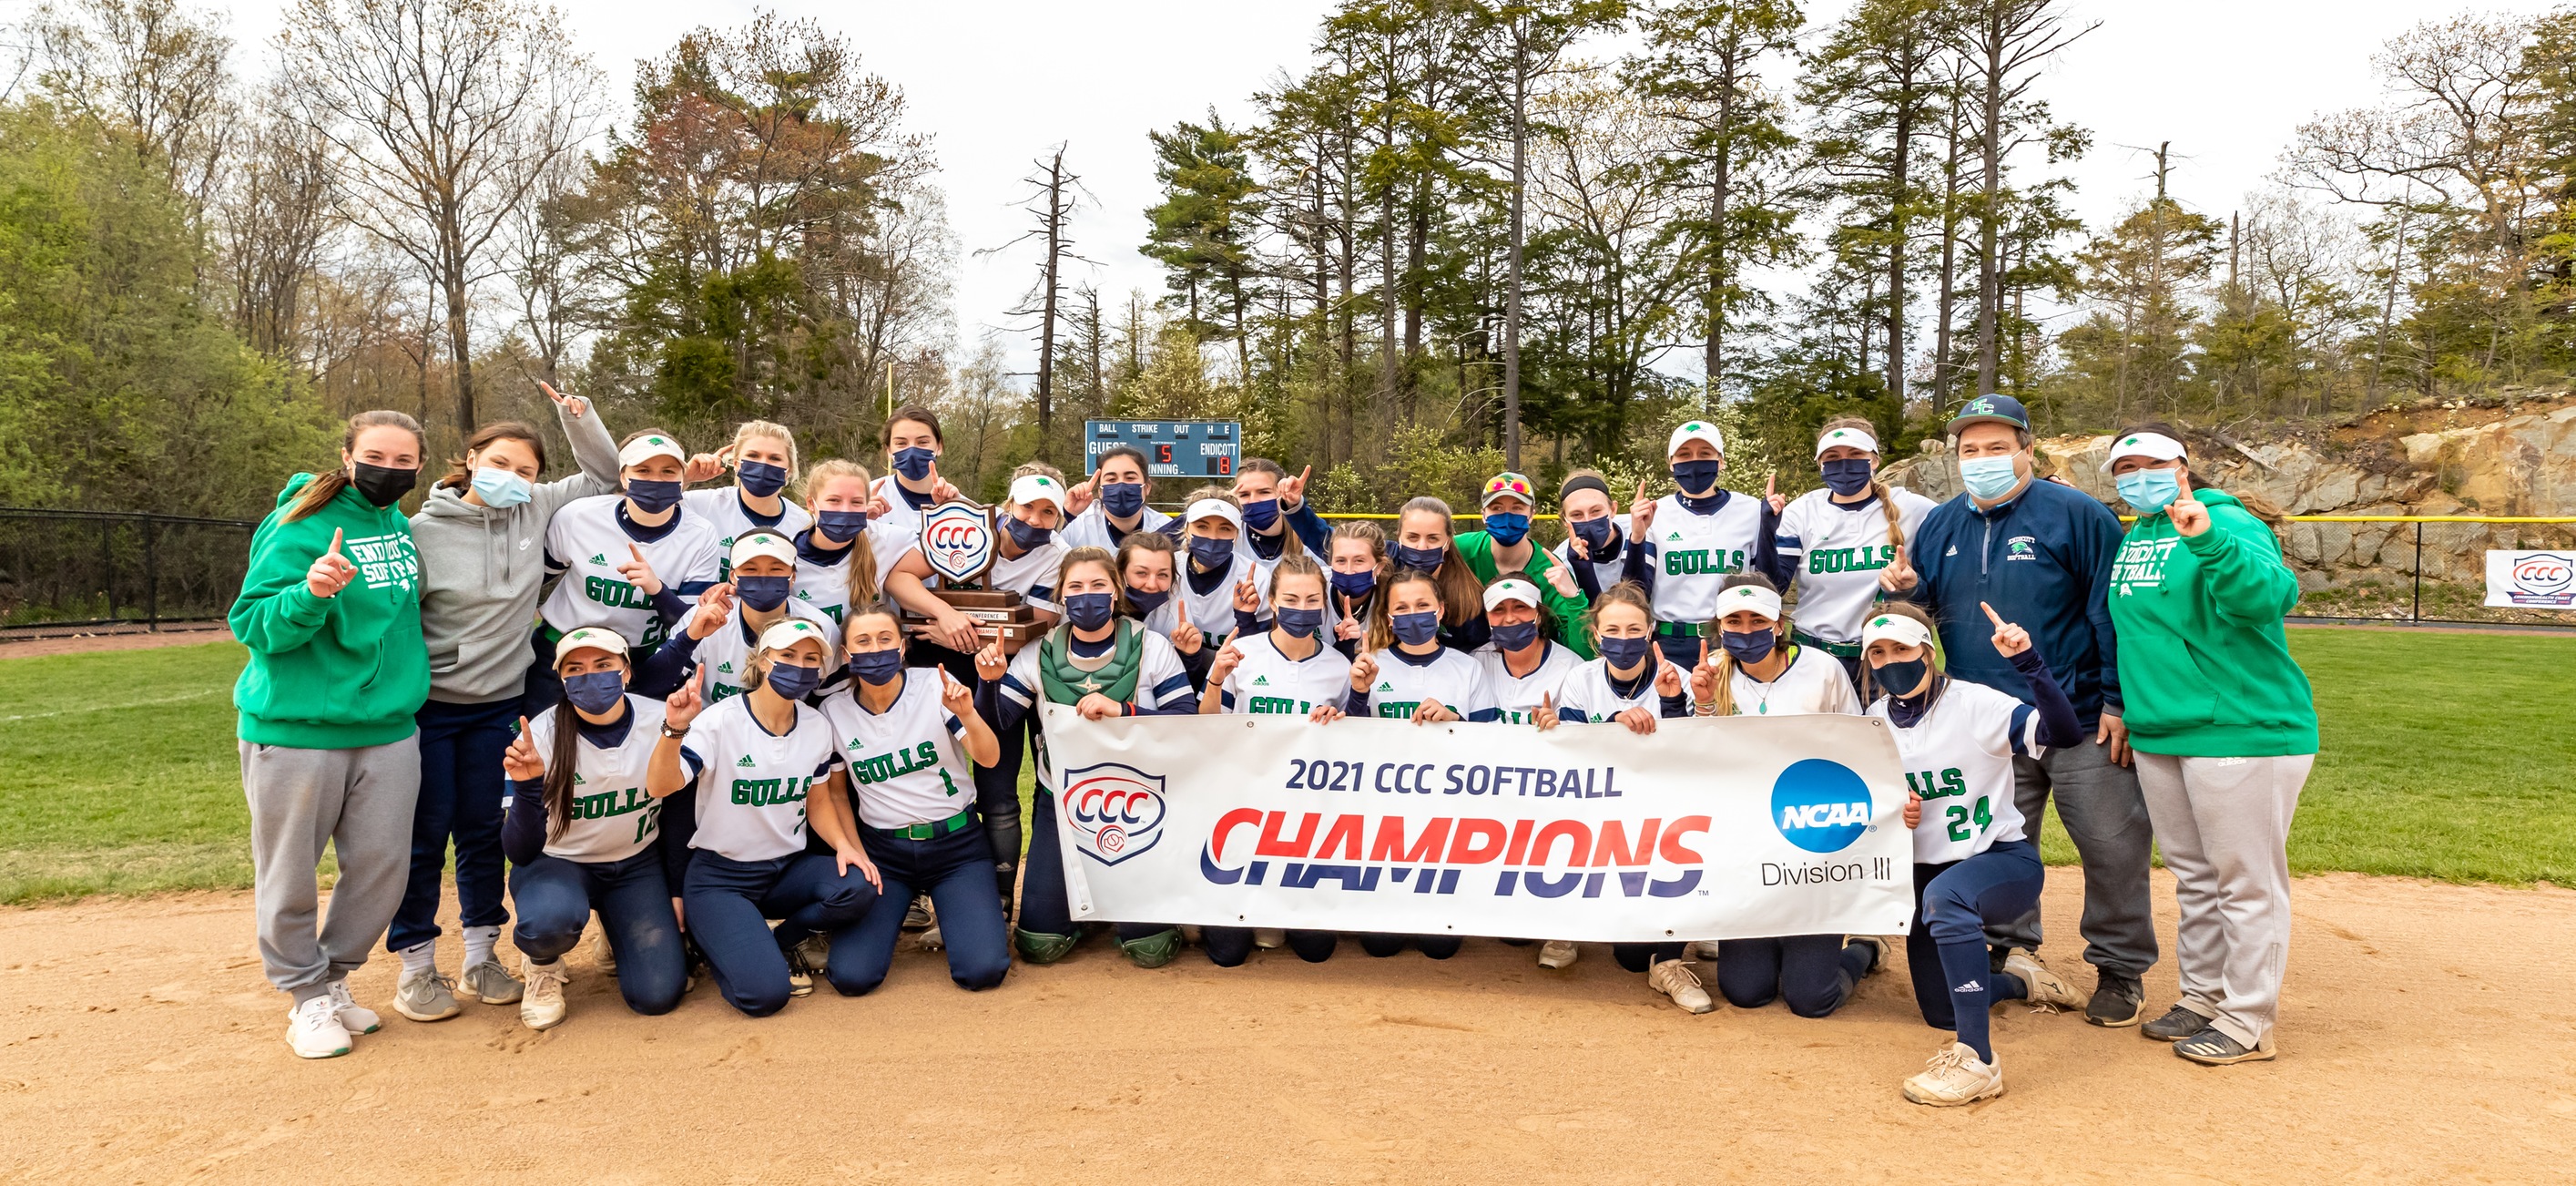 BACK-TO-BACK: Endicott Sweeps Western New England To Claim Second Straight CCC Championship